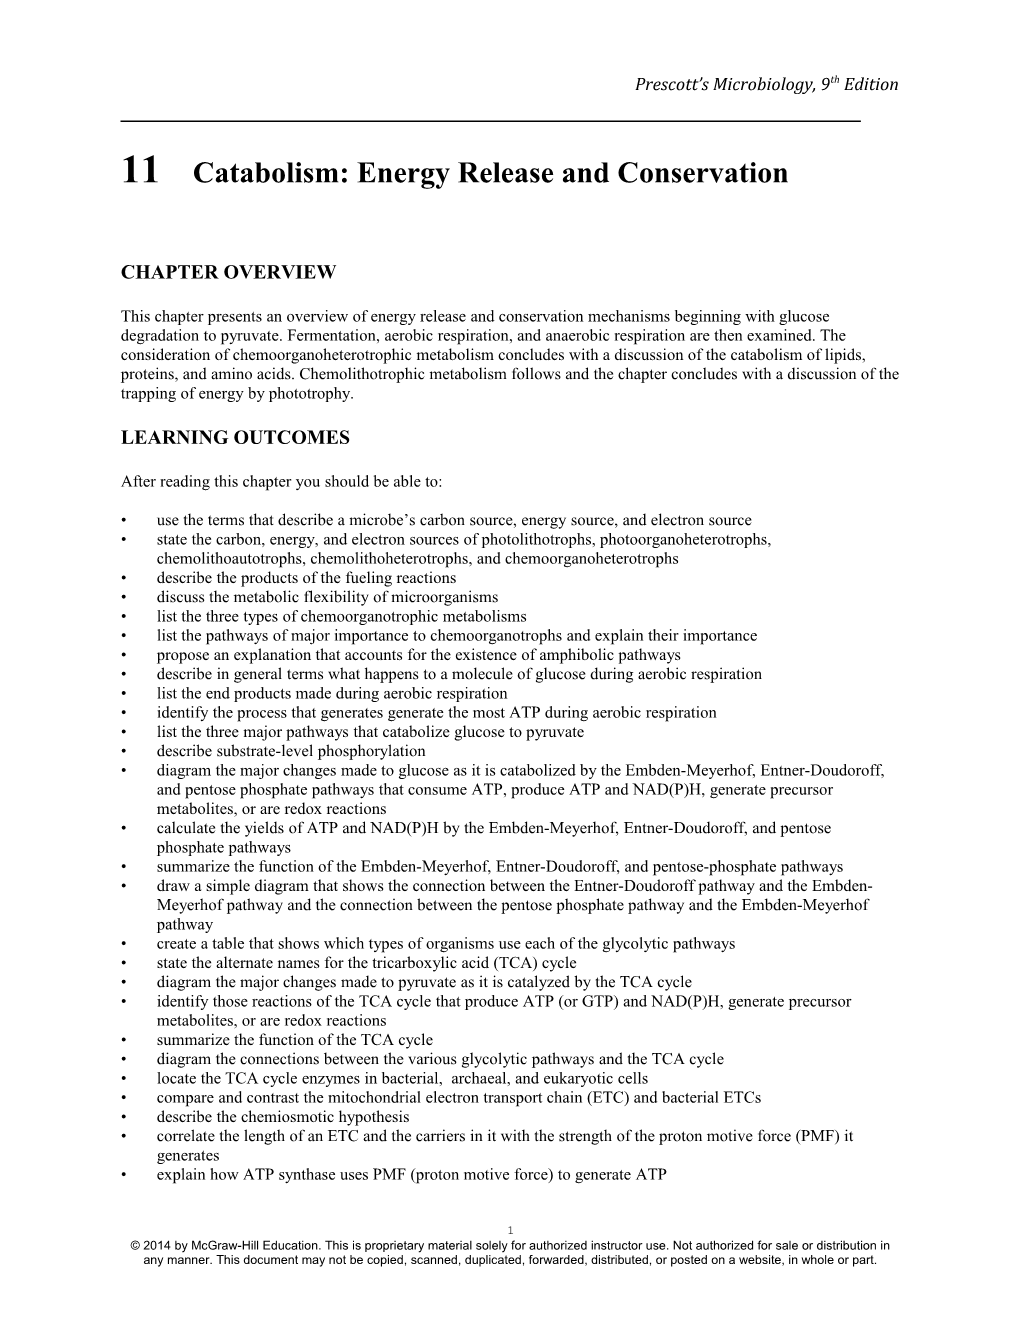 11Catabolism: Energy Release and Conservation